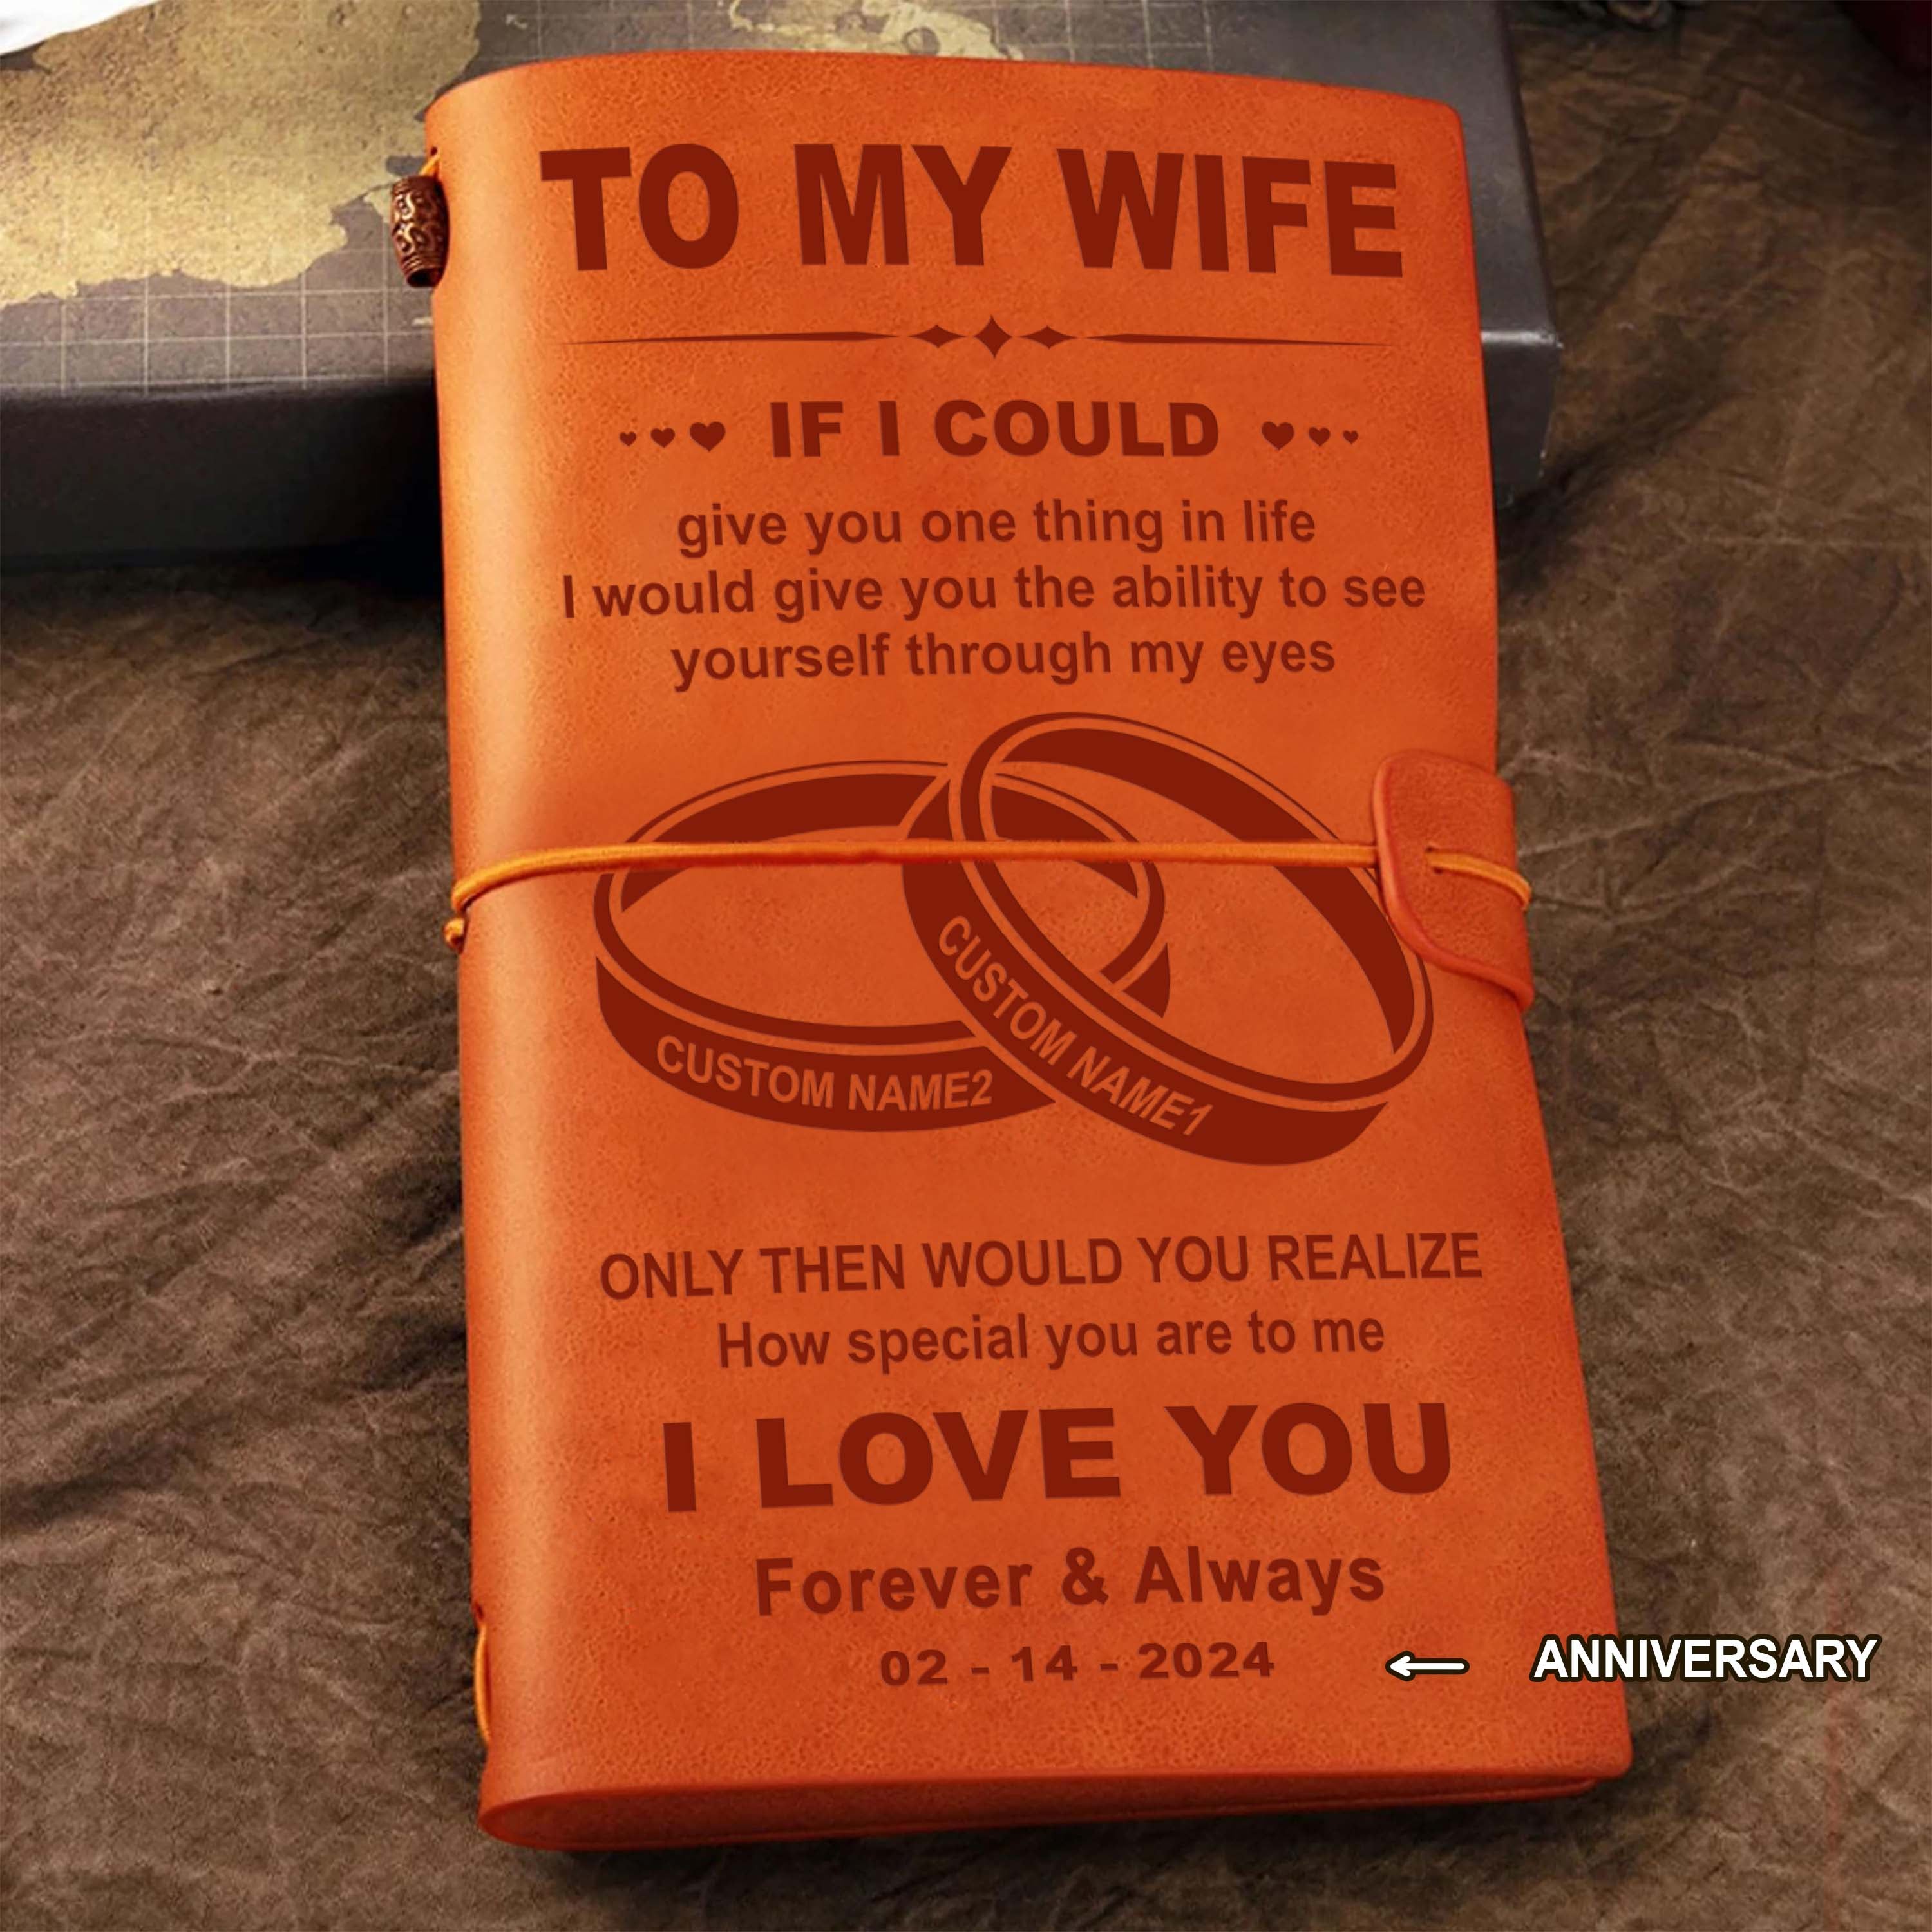 Perfect for anniversaries, birthdays, or just because-Vintage Journal Husband to wife- If I could give you one thing in life